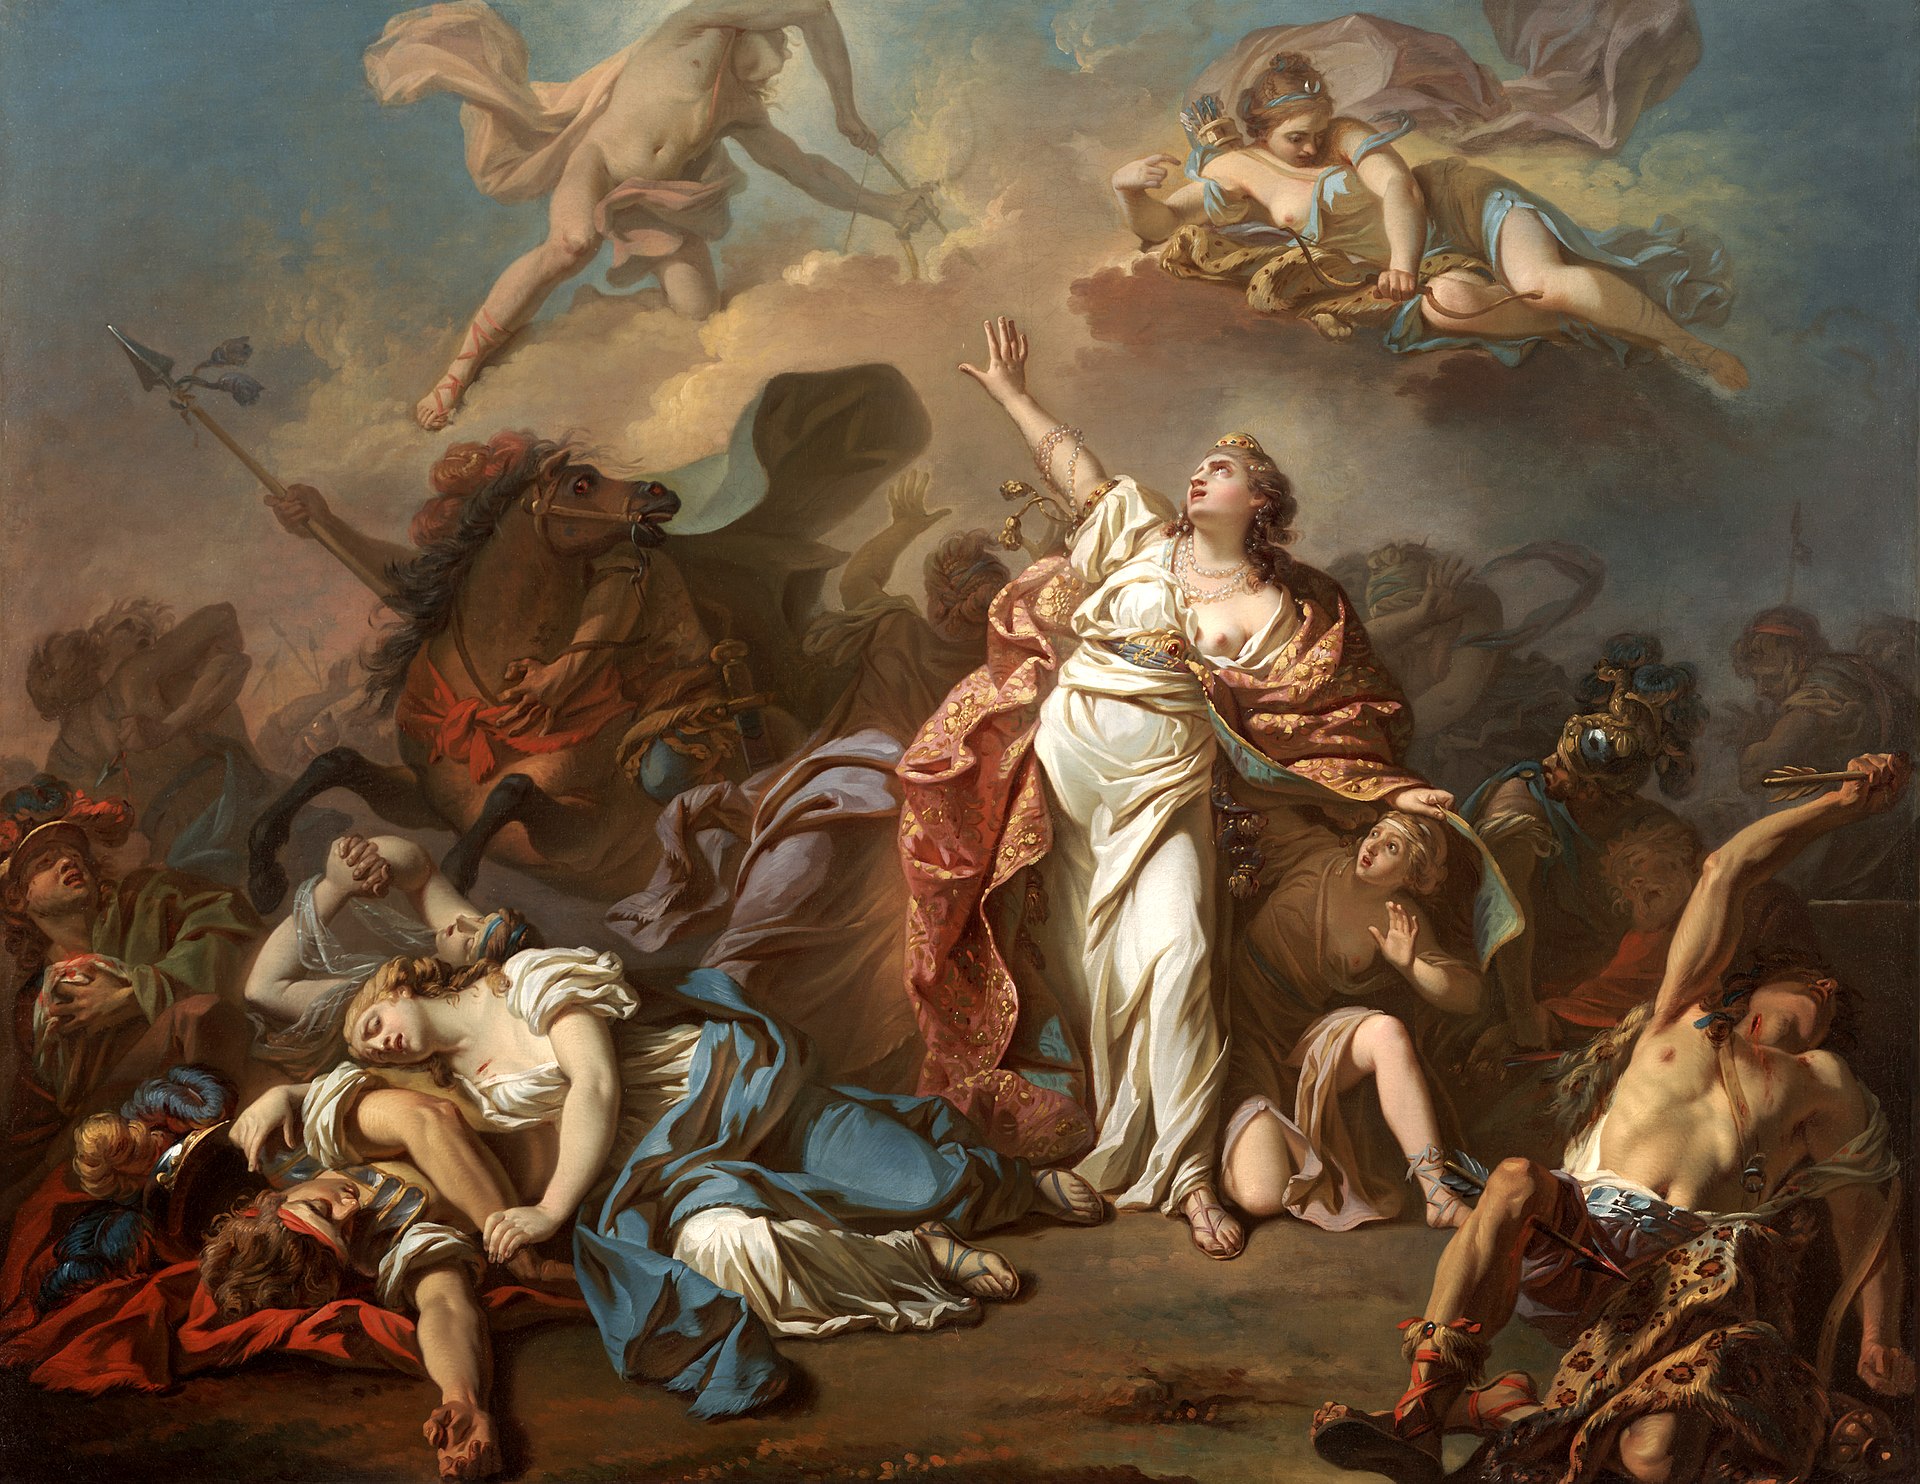 Jacques-Louis David depicting Niobe attempting to shield her children from Artemis and Apollo